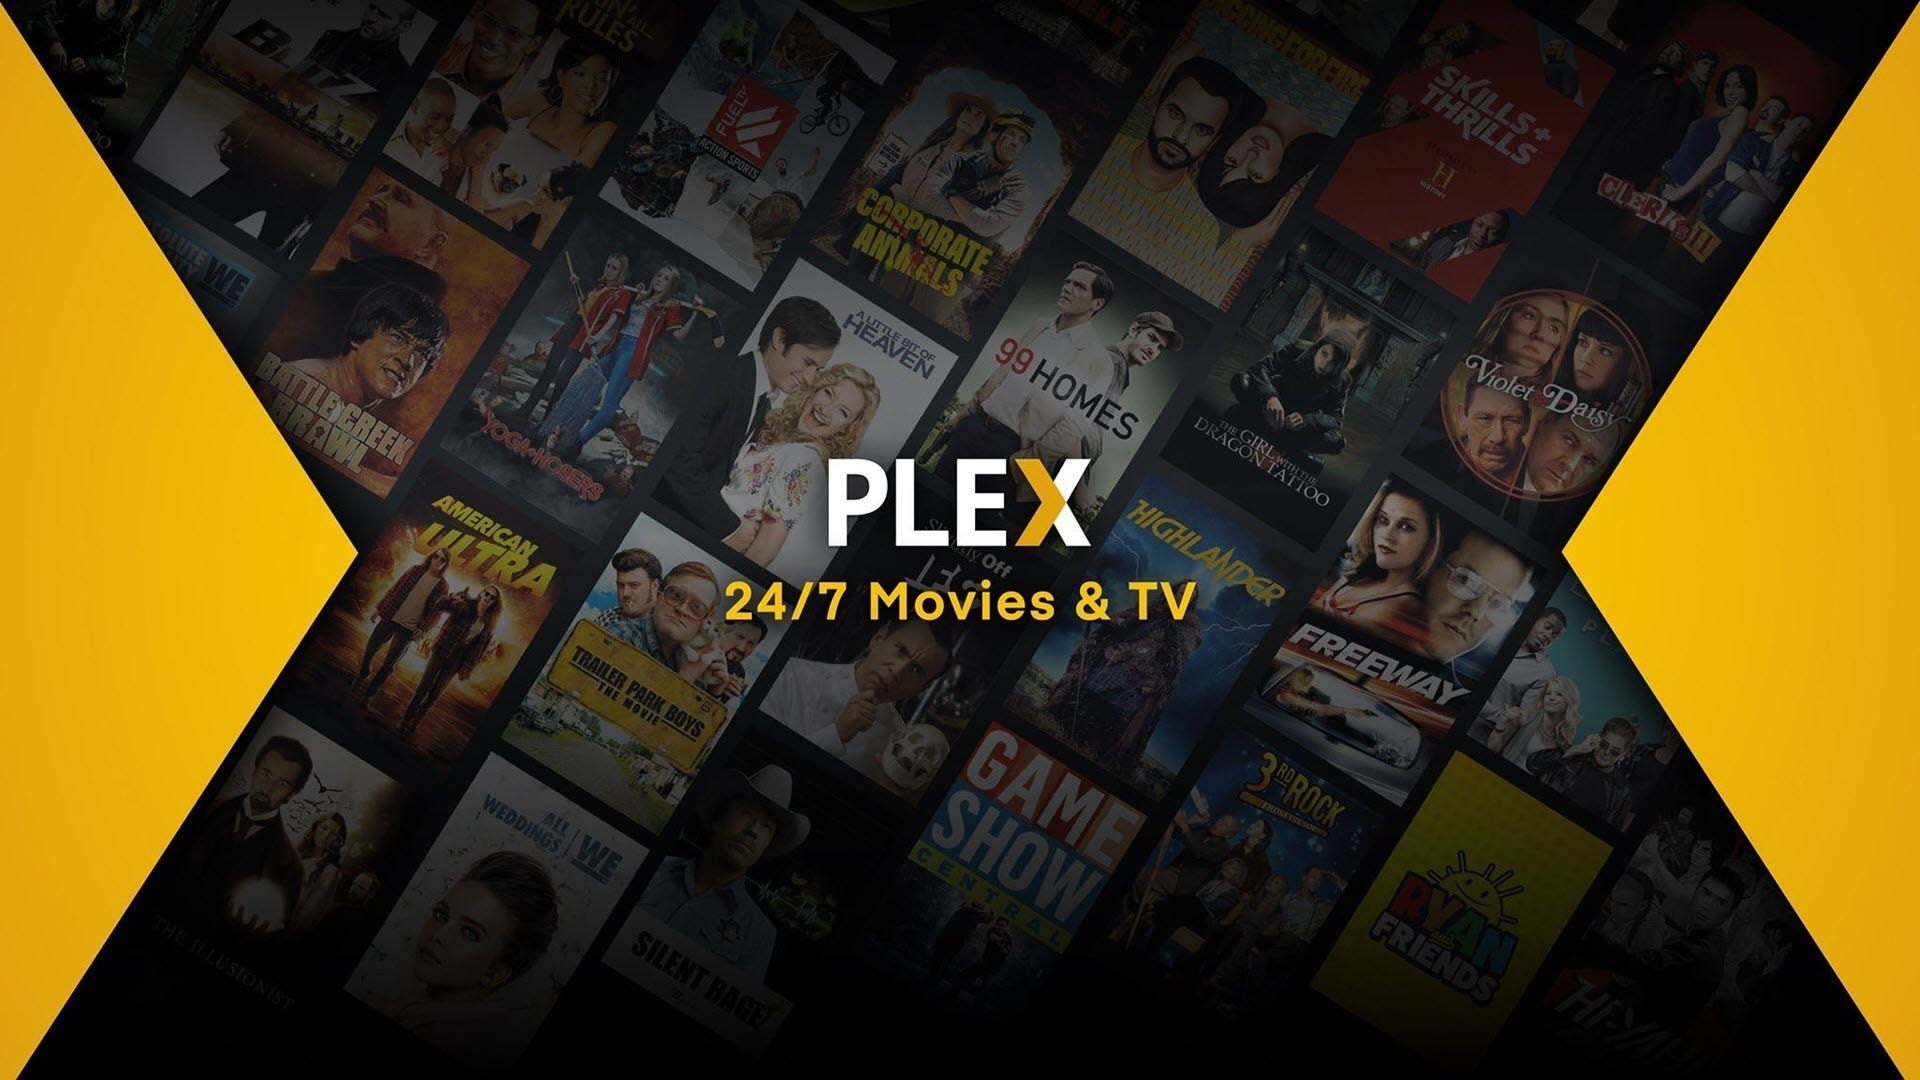 Plex data breach: Emails and passwords are exposed